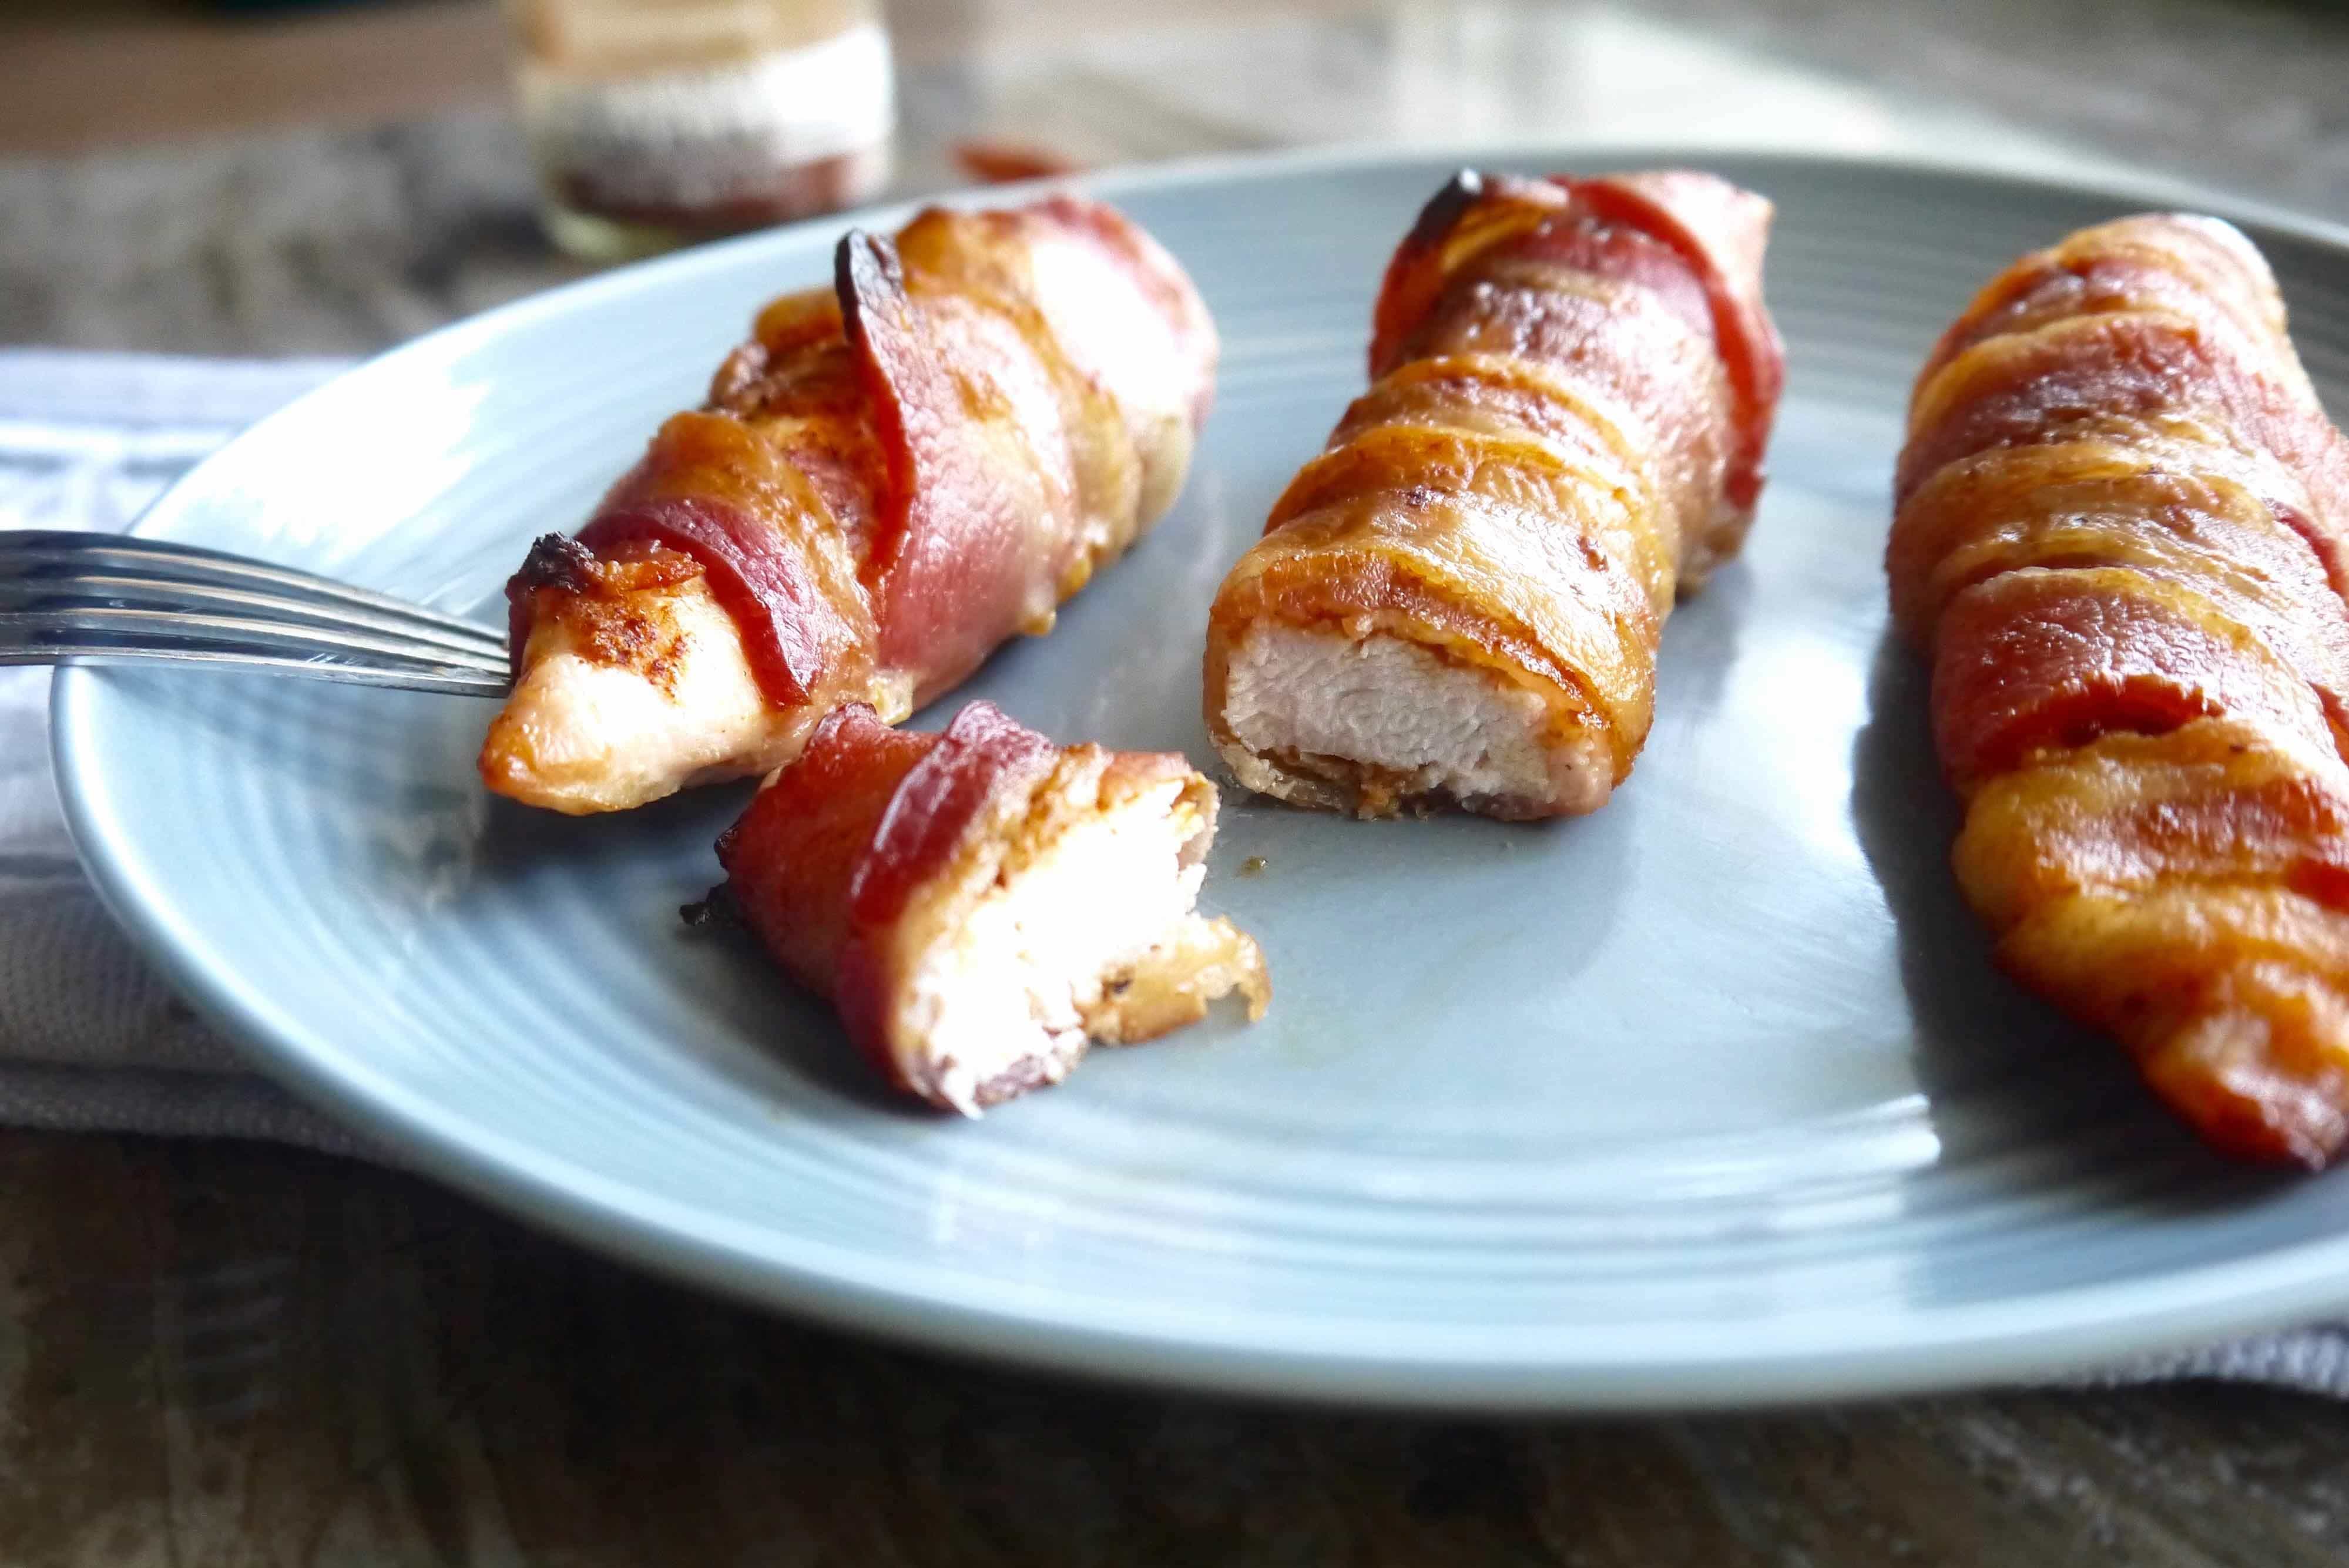 Bacon clipart cooked bacon. Wrapped chicken tenders paleo